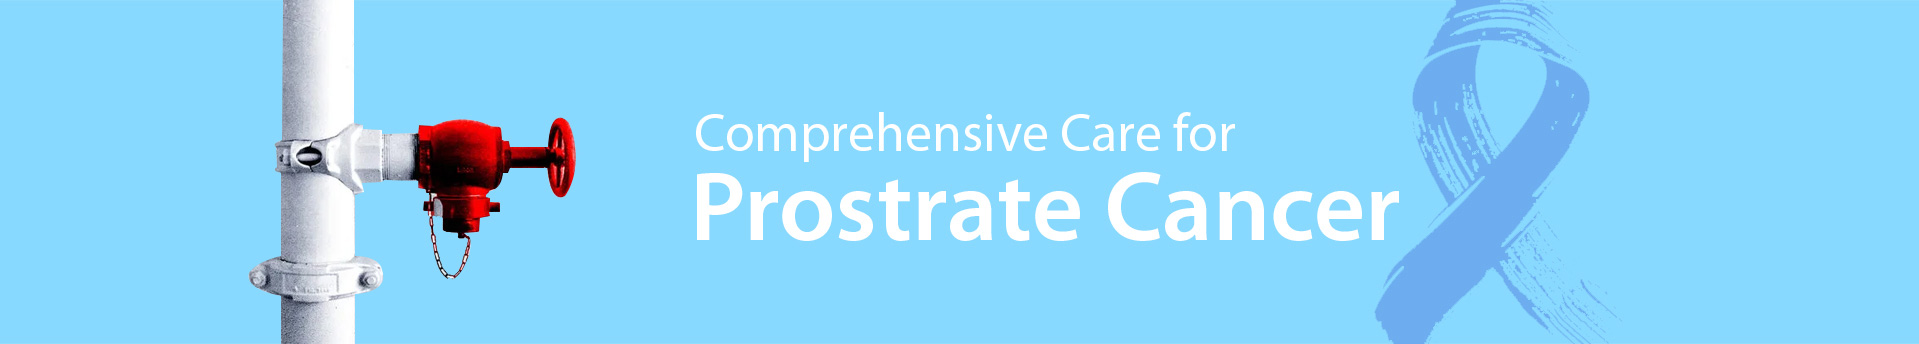 Medicaoncology Prostrate Cancer